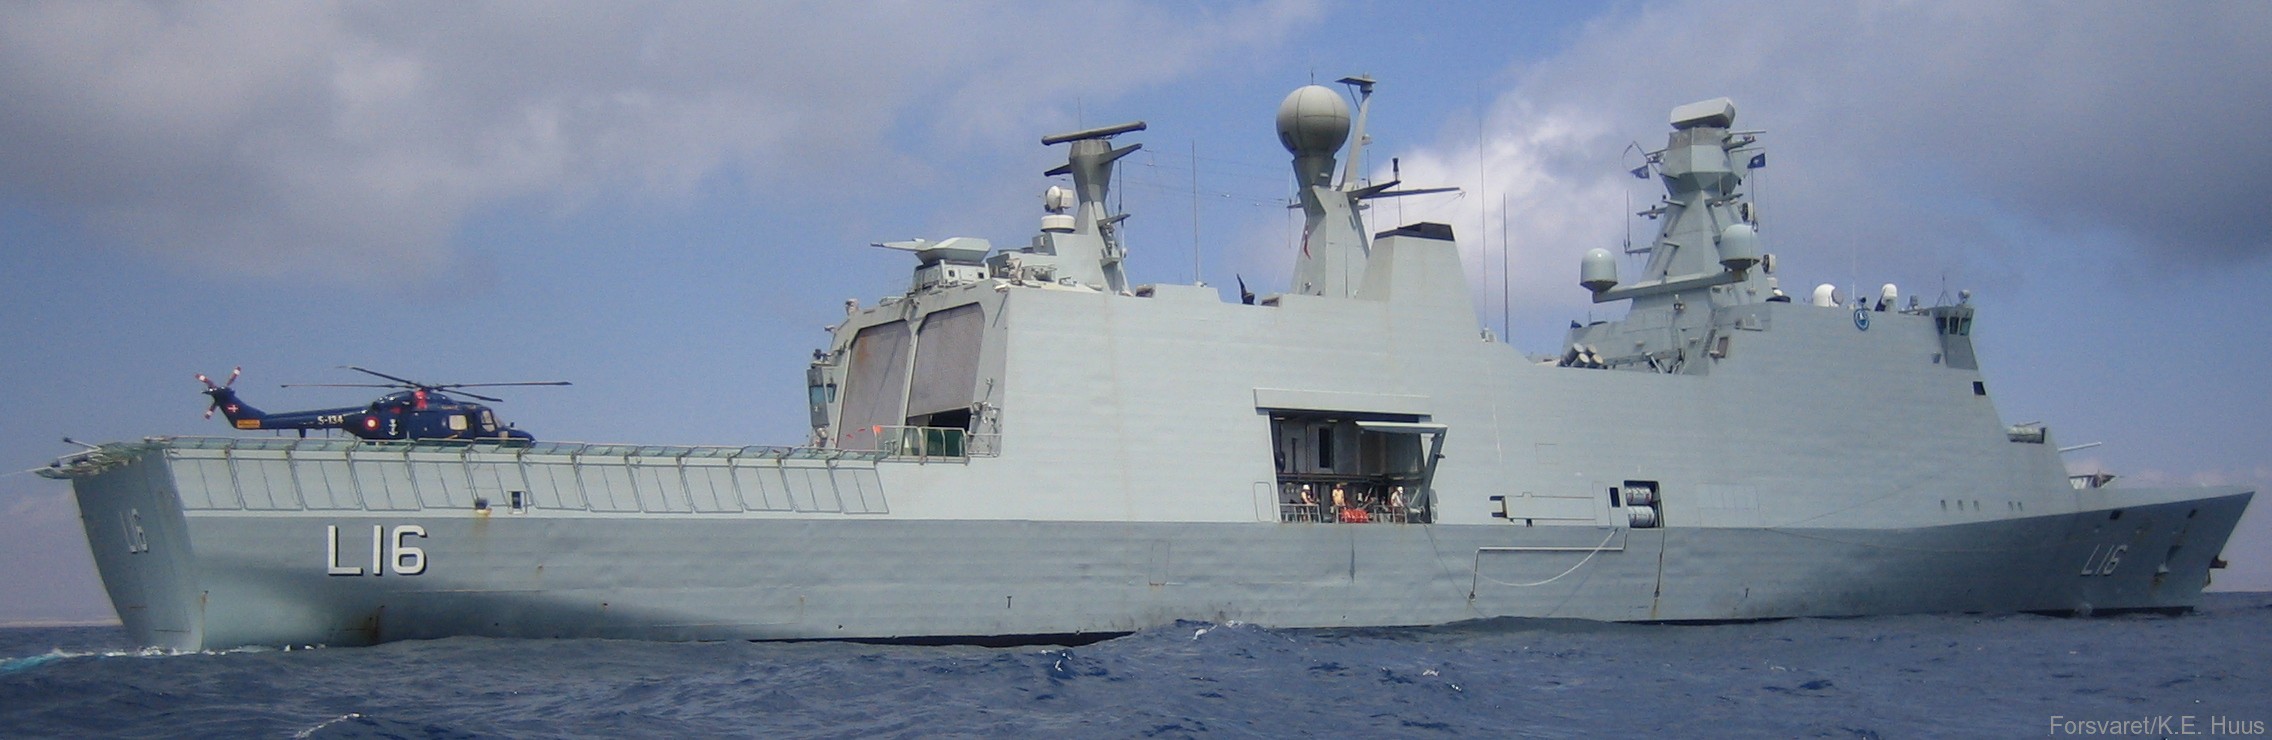 l-16 hdms absalon command support ship frigate royal danish navy 81